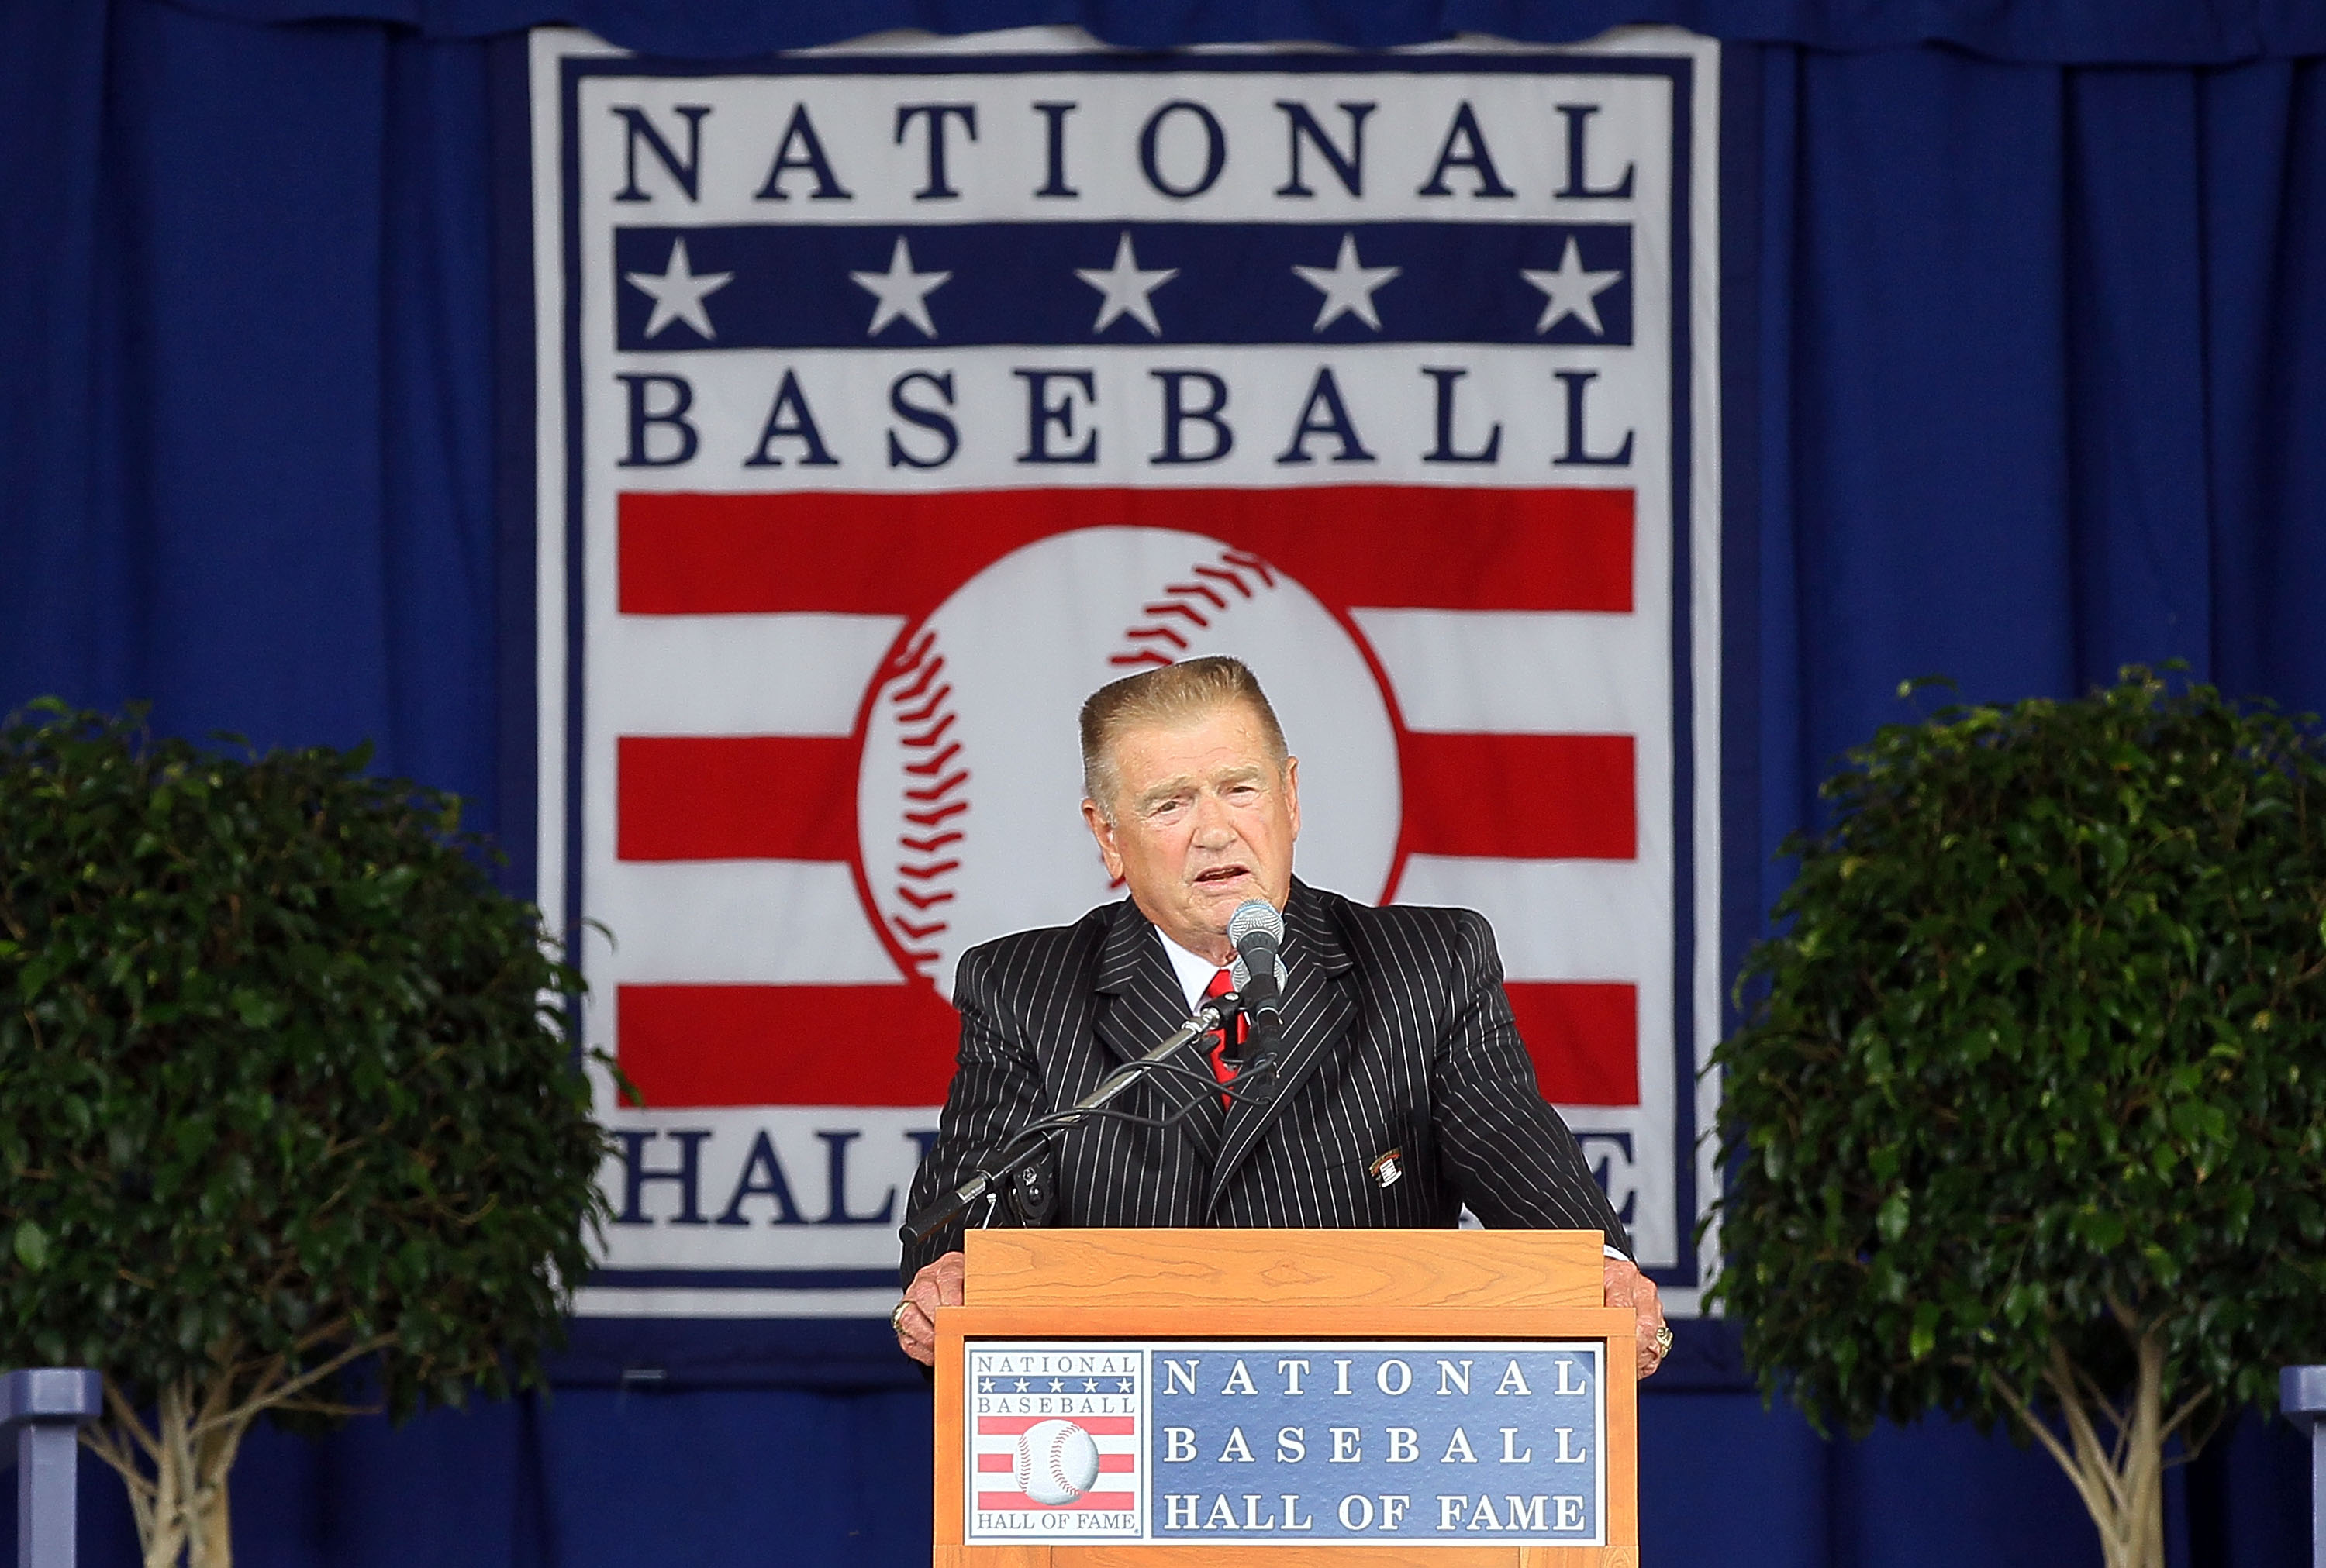 COOPERSTOWN, NY - JULY 25:  The 2010 inductee Whitey Herzog gives his speech at Clark Sports Center during the Baseball Hall of Fame induction ceremony on July 25, 20010 in Cooperstown, New York. Herzog served as manager for four teams and finished his ca